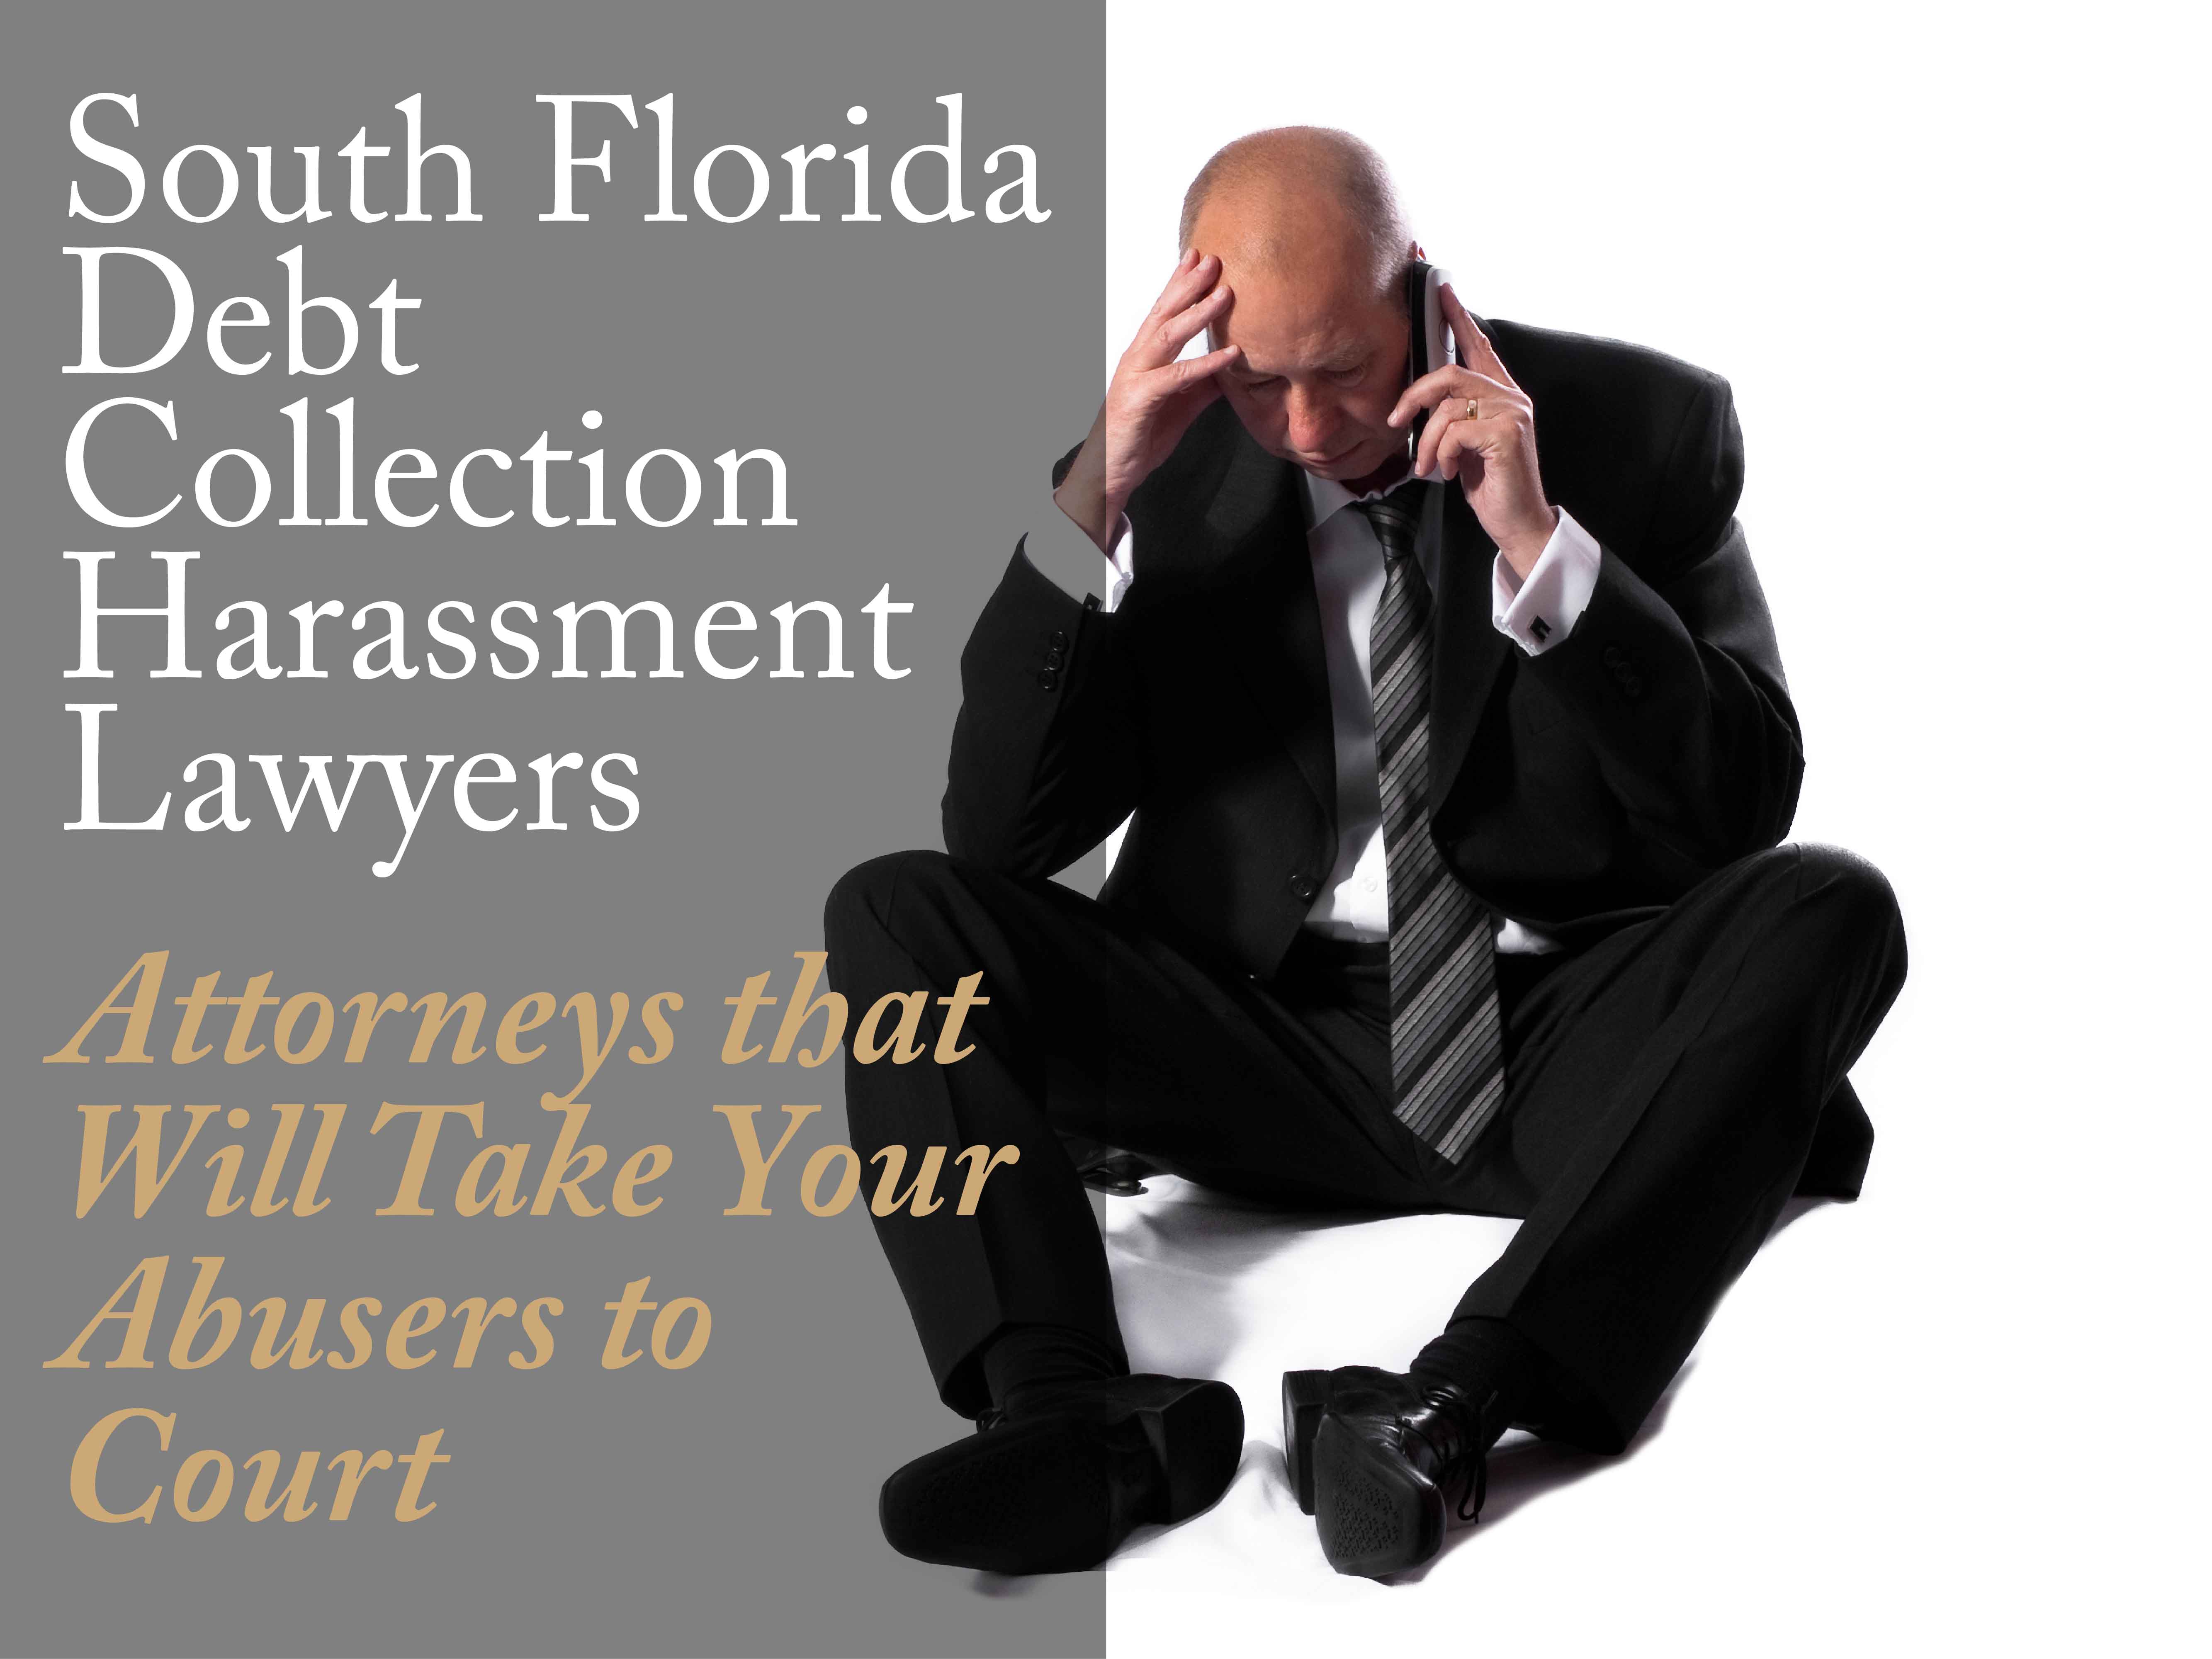 South Florida Debt Collection Harassment Lawyers